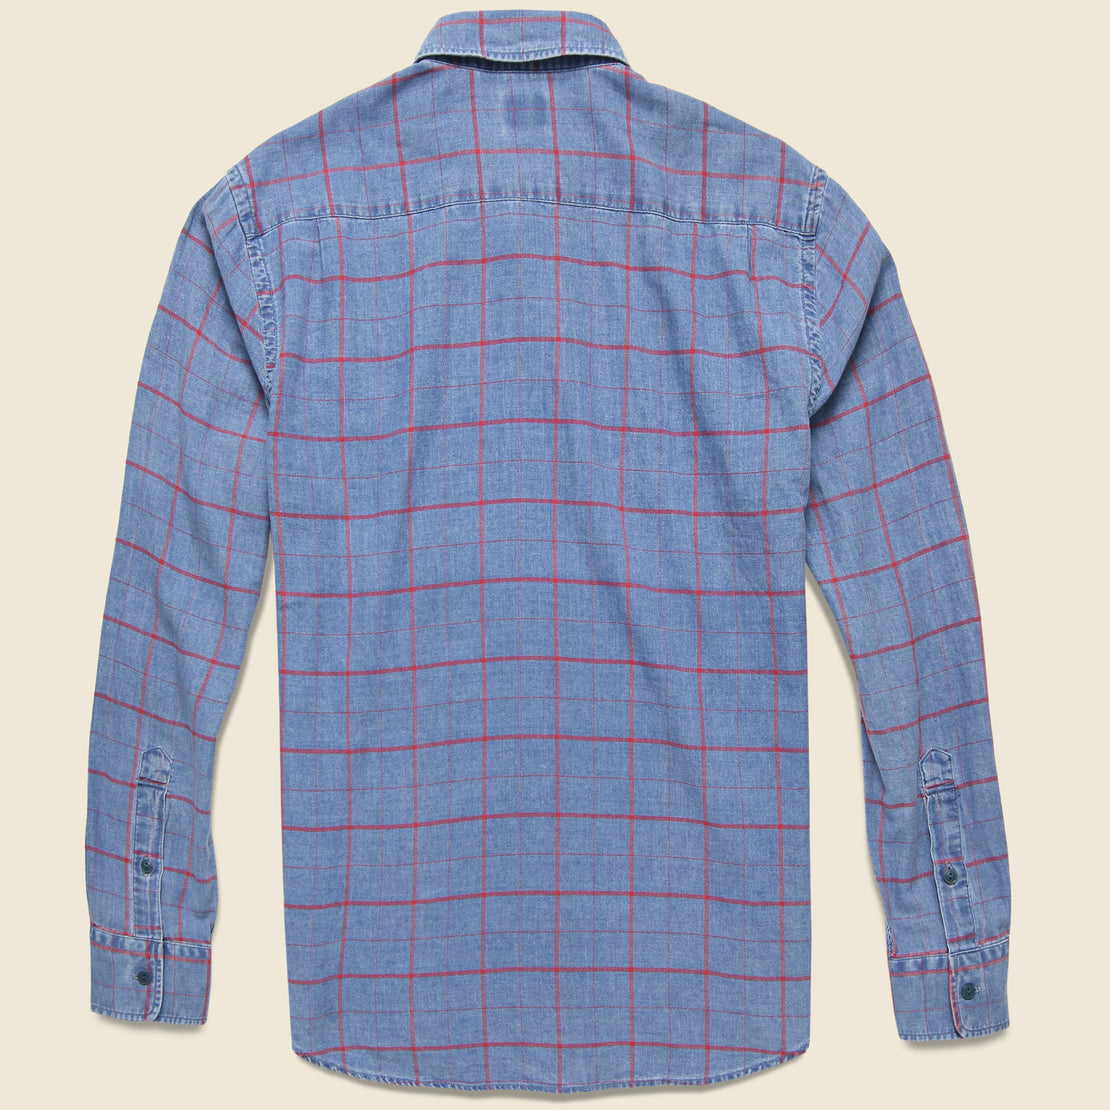 Ventura Shirt - Washed Red Windowpane - Faherty - STAG Provisions - Tops - L/S Woven - Plaid